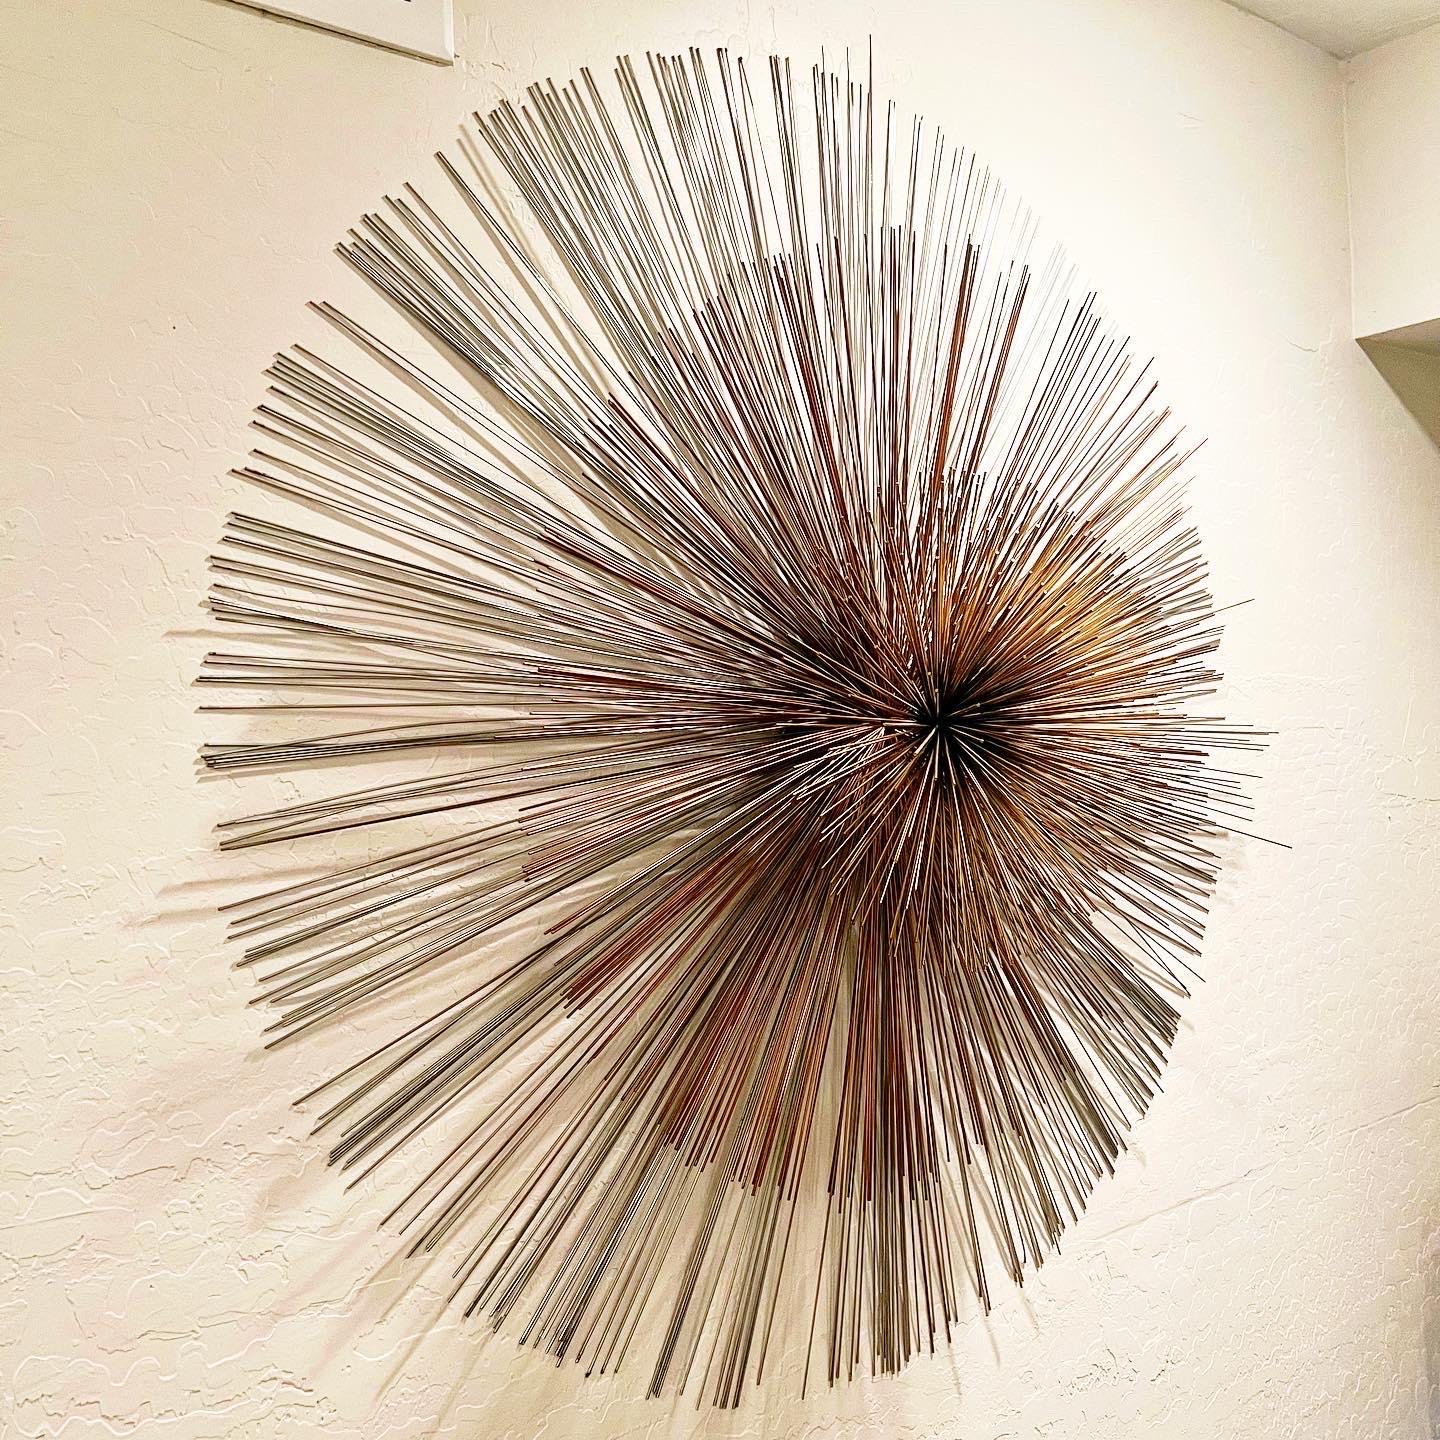 C. Jeré 1987 urchin or pom pom brass wall art, extra large round version about 41” wide and 11” deep. Made of three layers with different metallic colors: chrome/silver, copper and brass. Signed on the back and in great condition. 